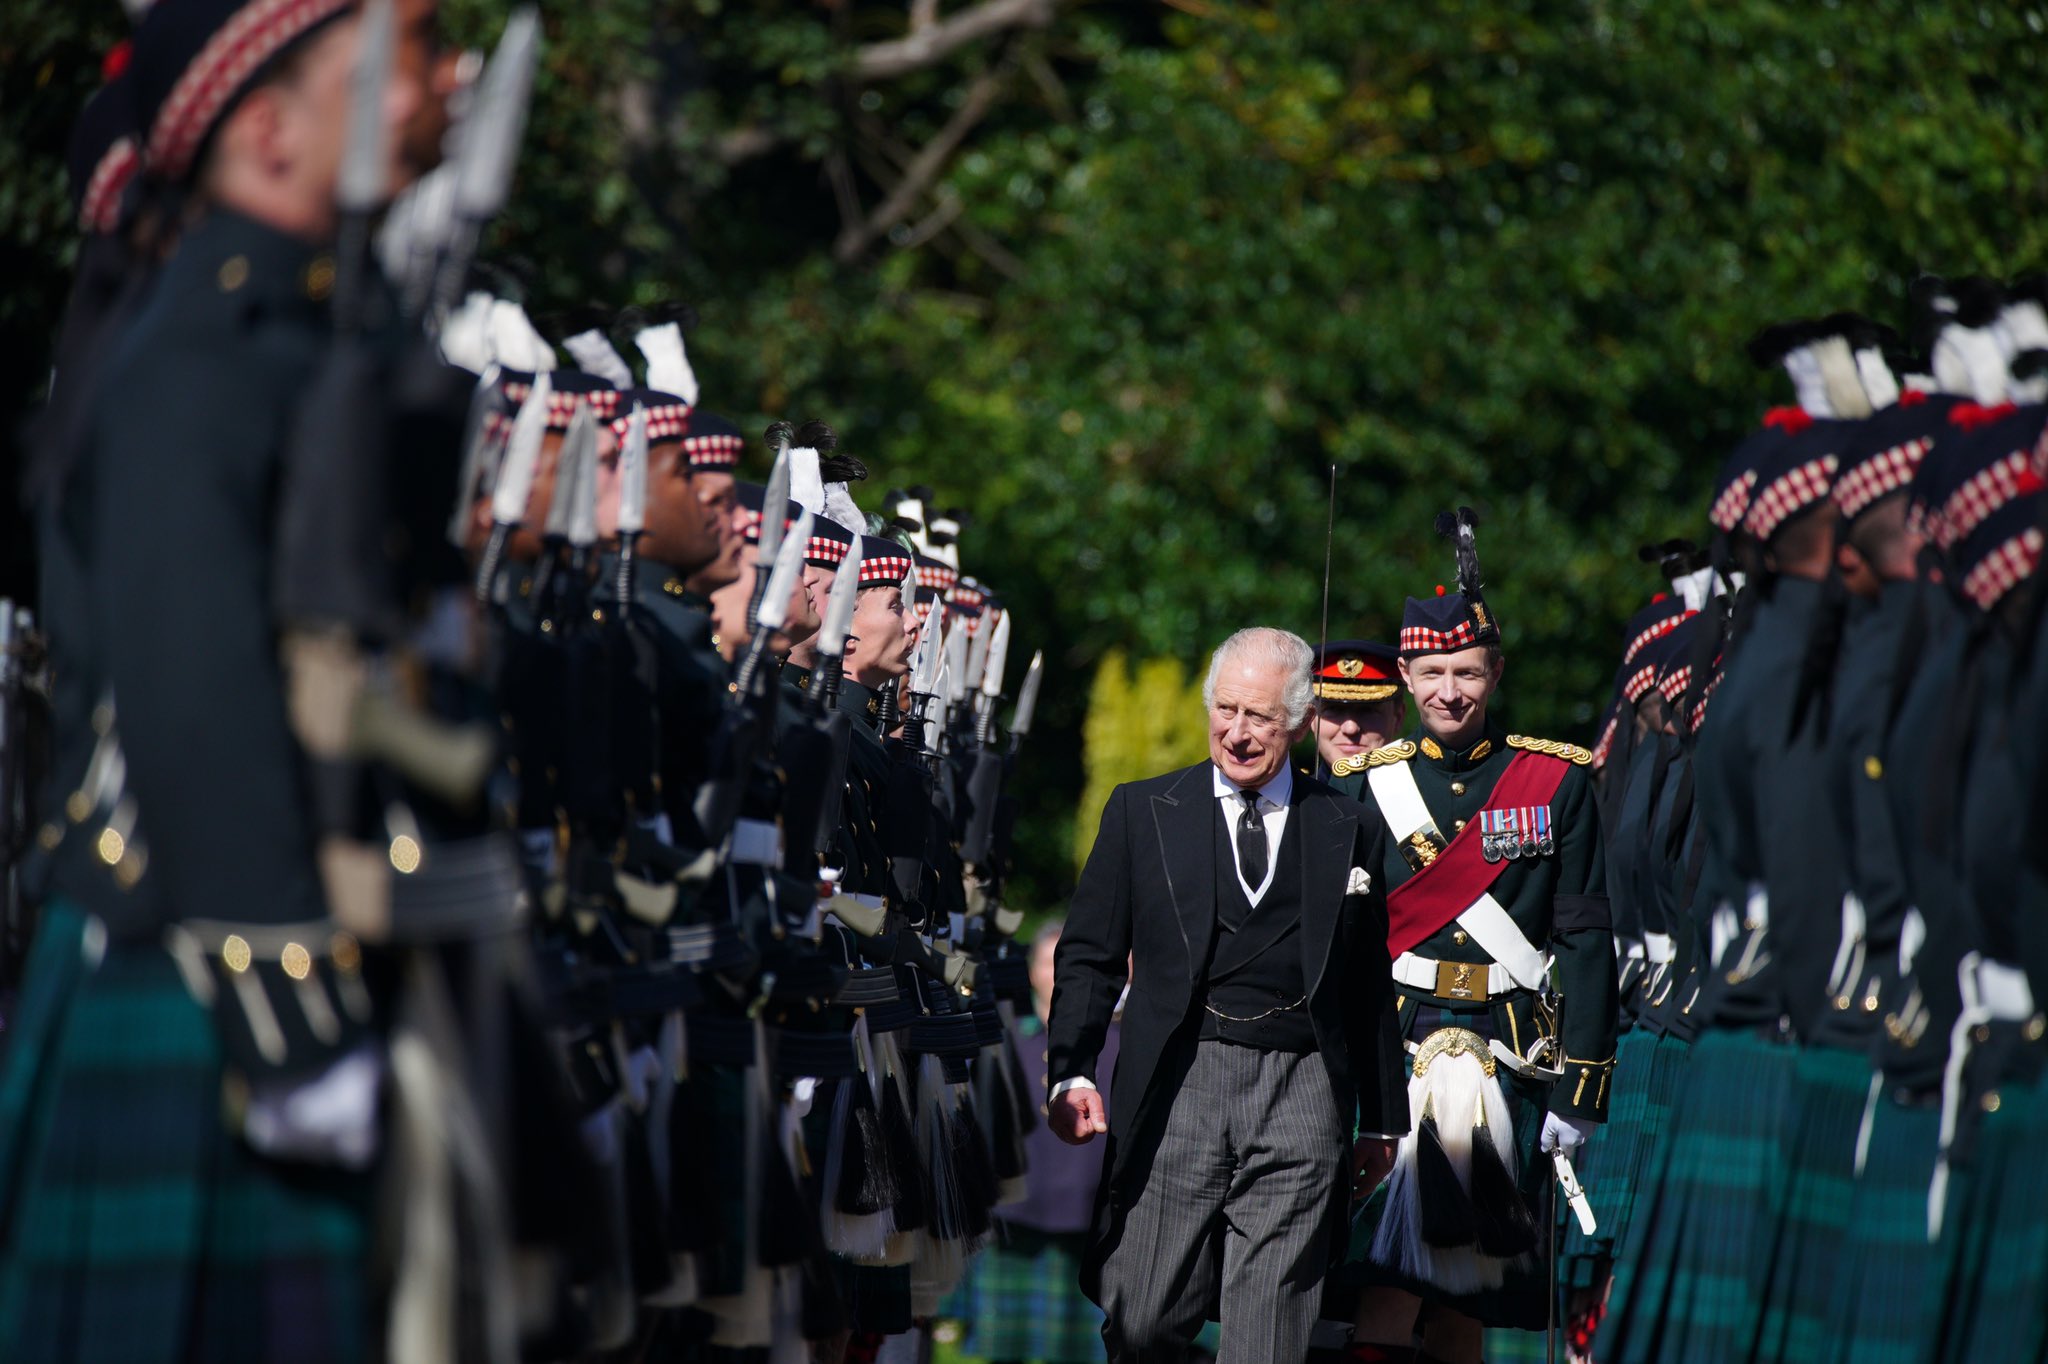 King Charles III in black tailcoat walks in the middle of two rows of military men in kilts in Edinburgh